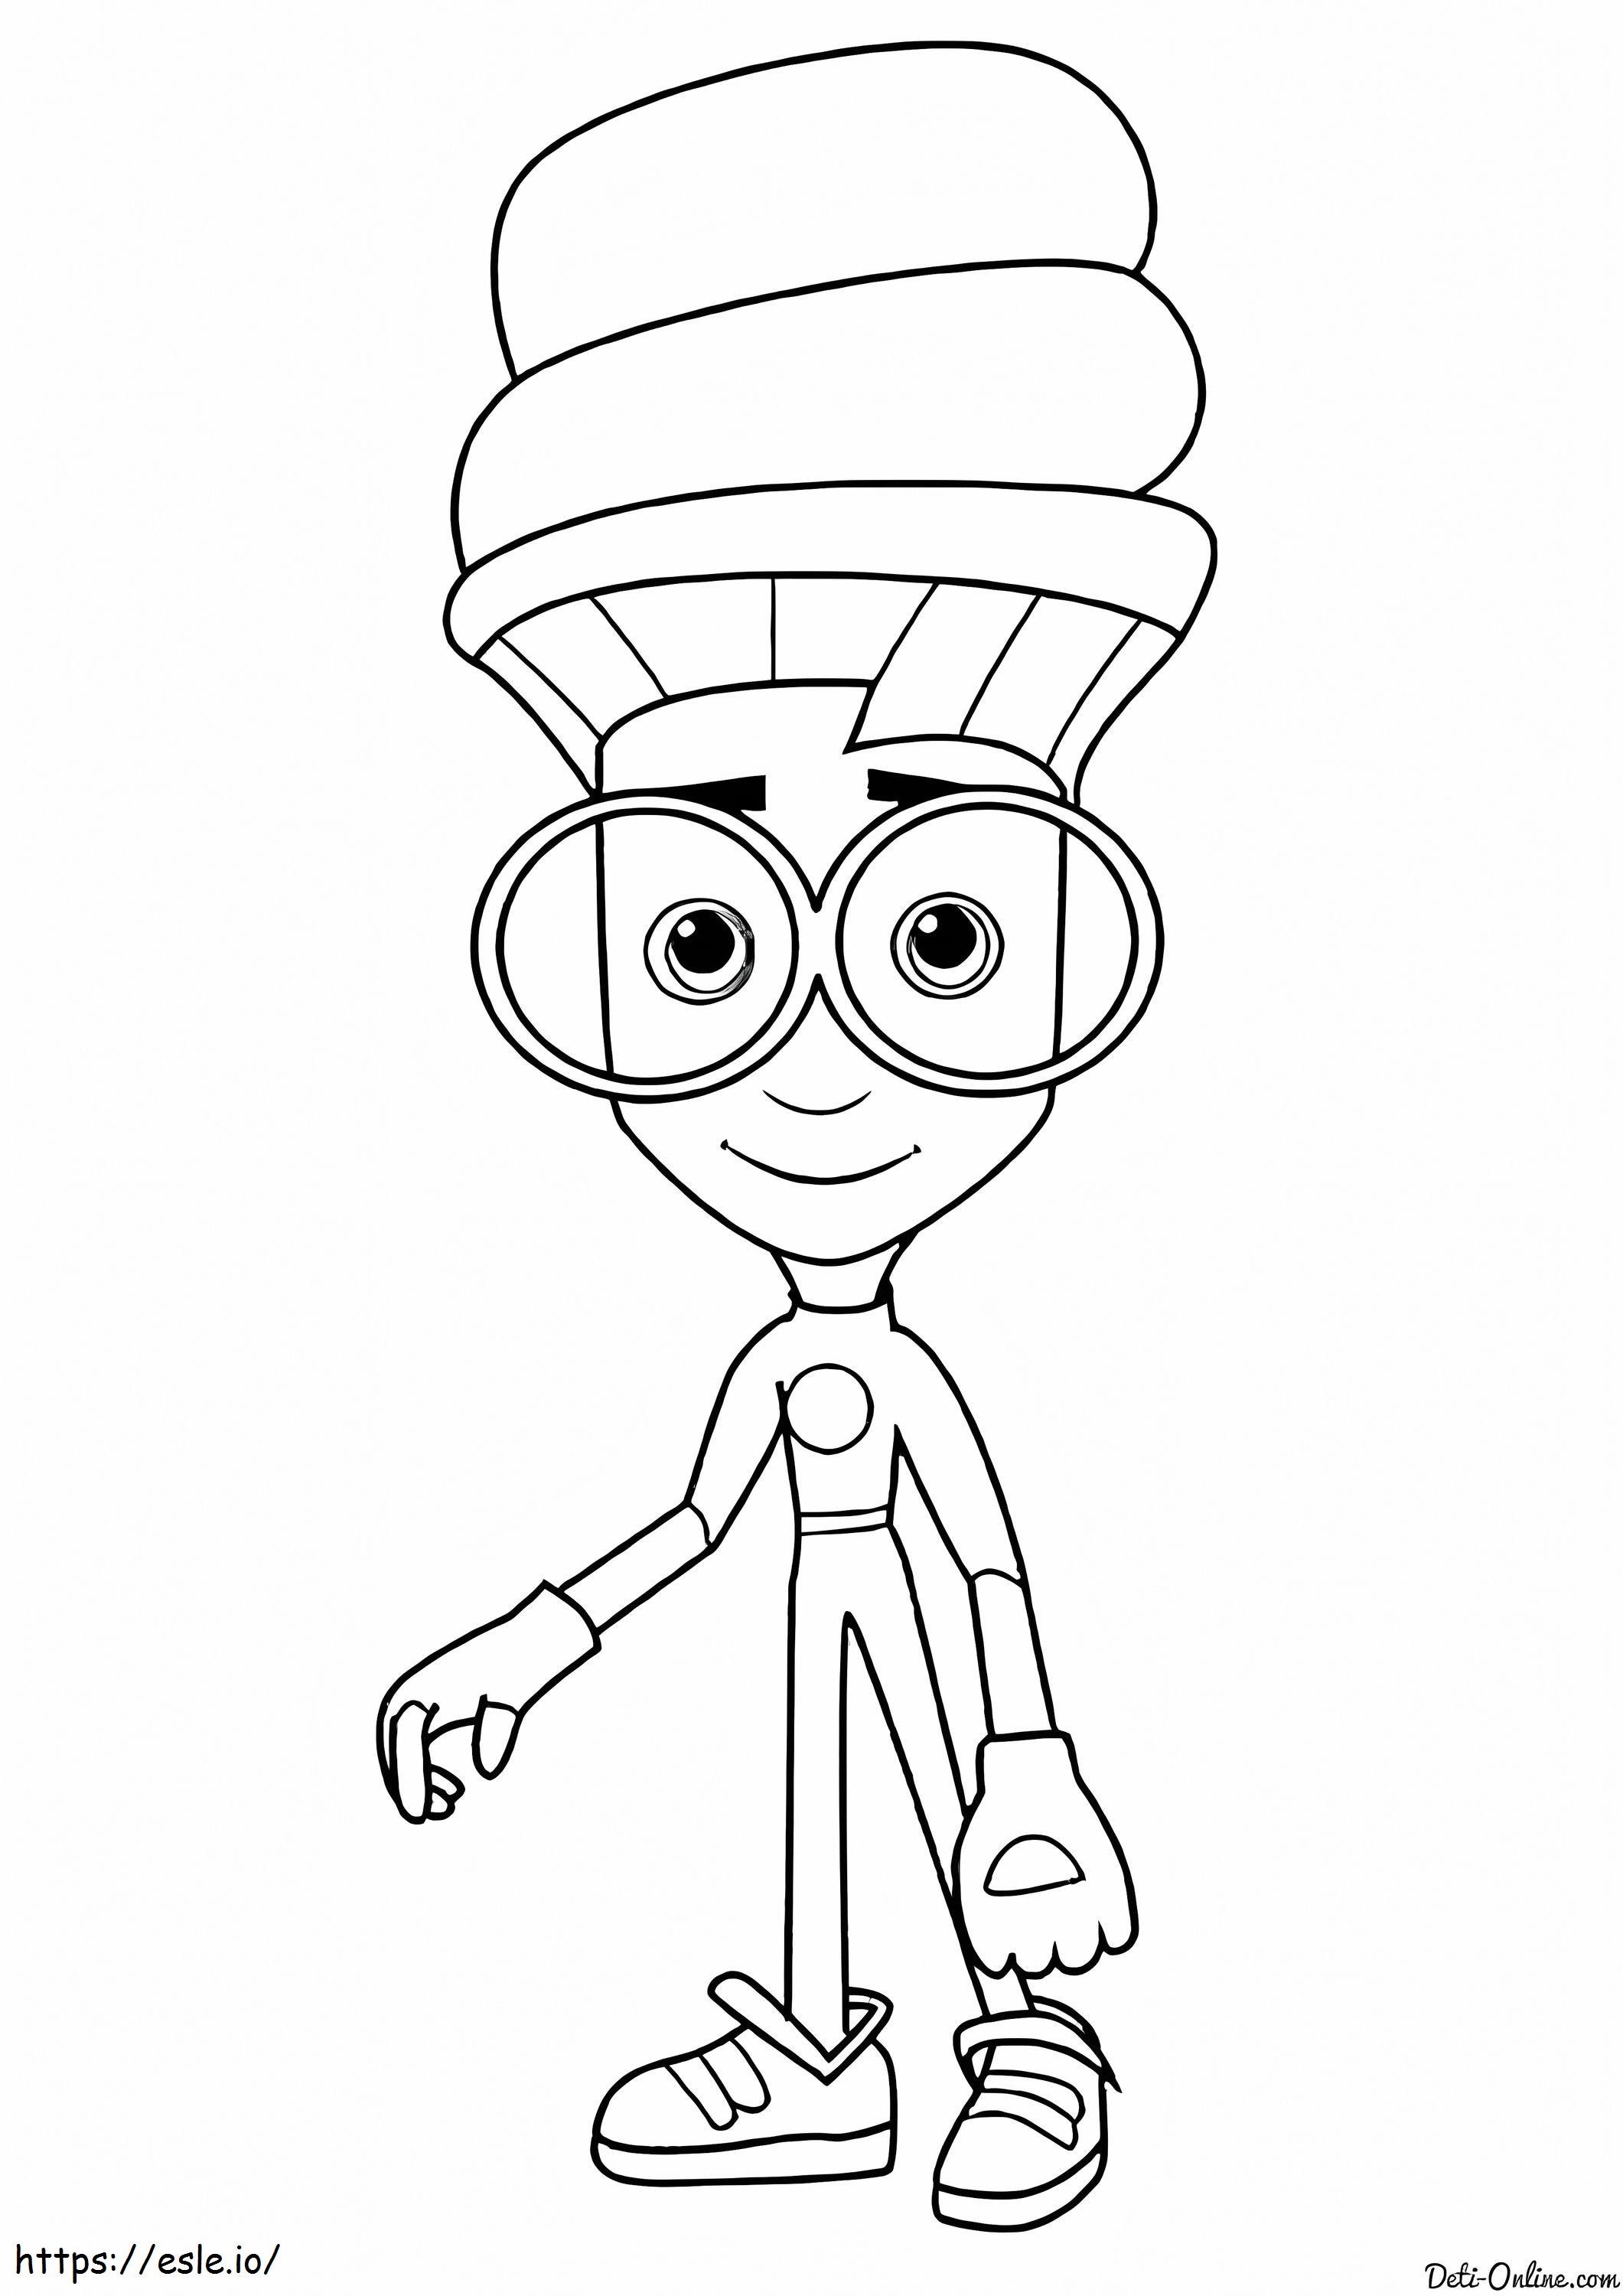 Digit From The Fixies coloring page